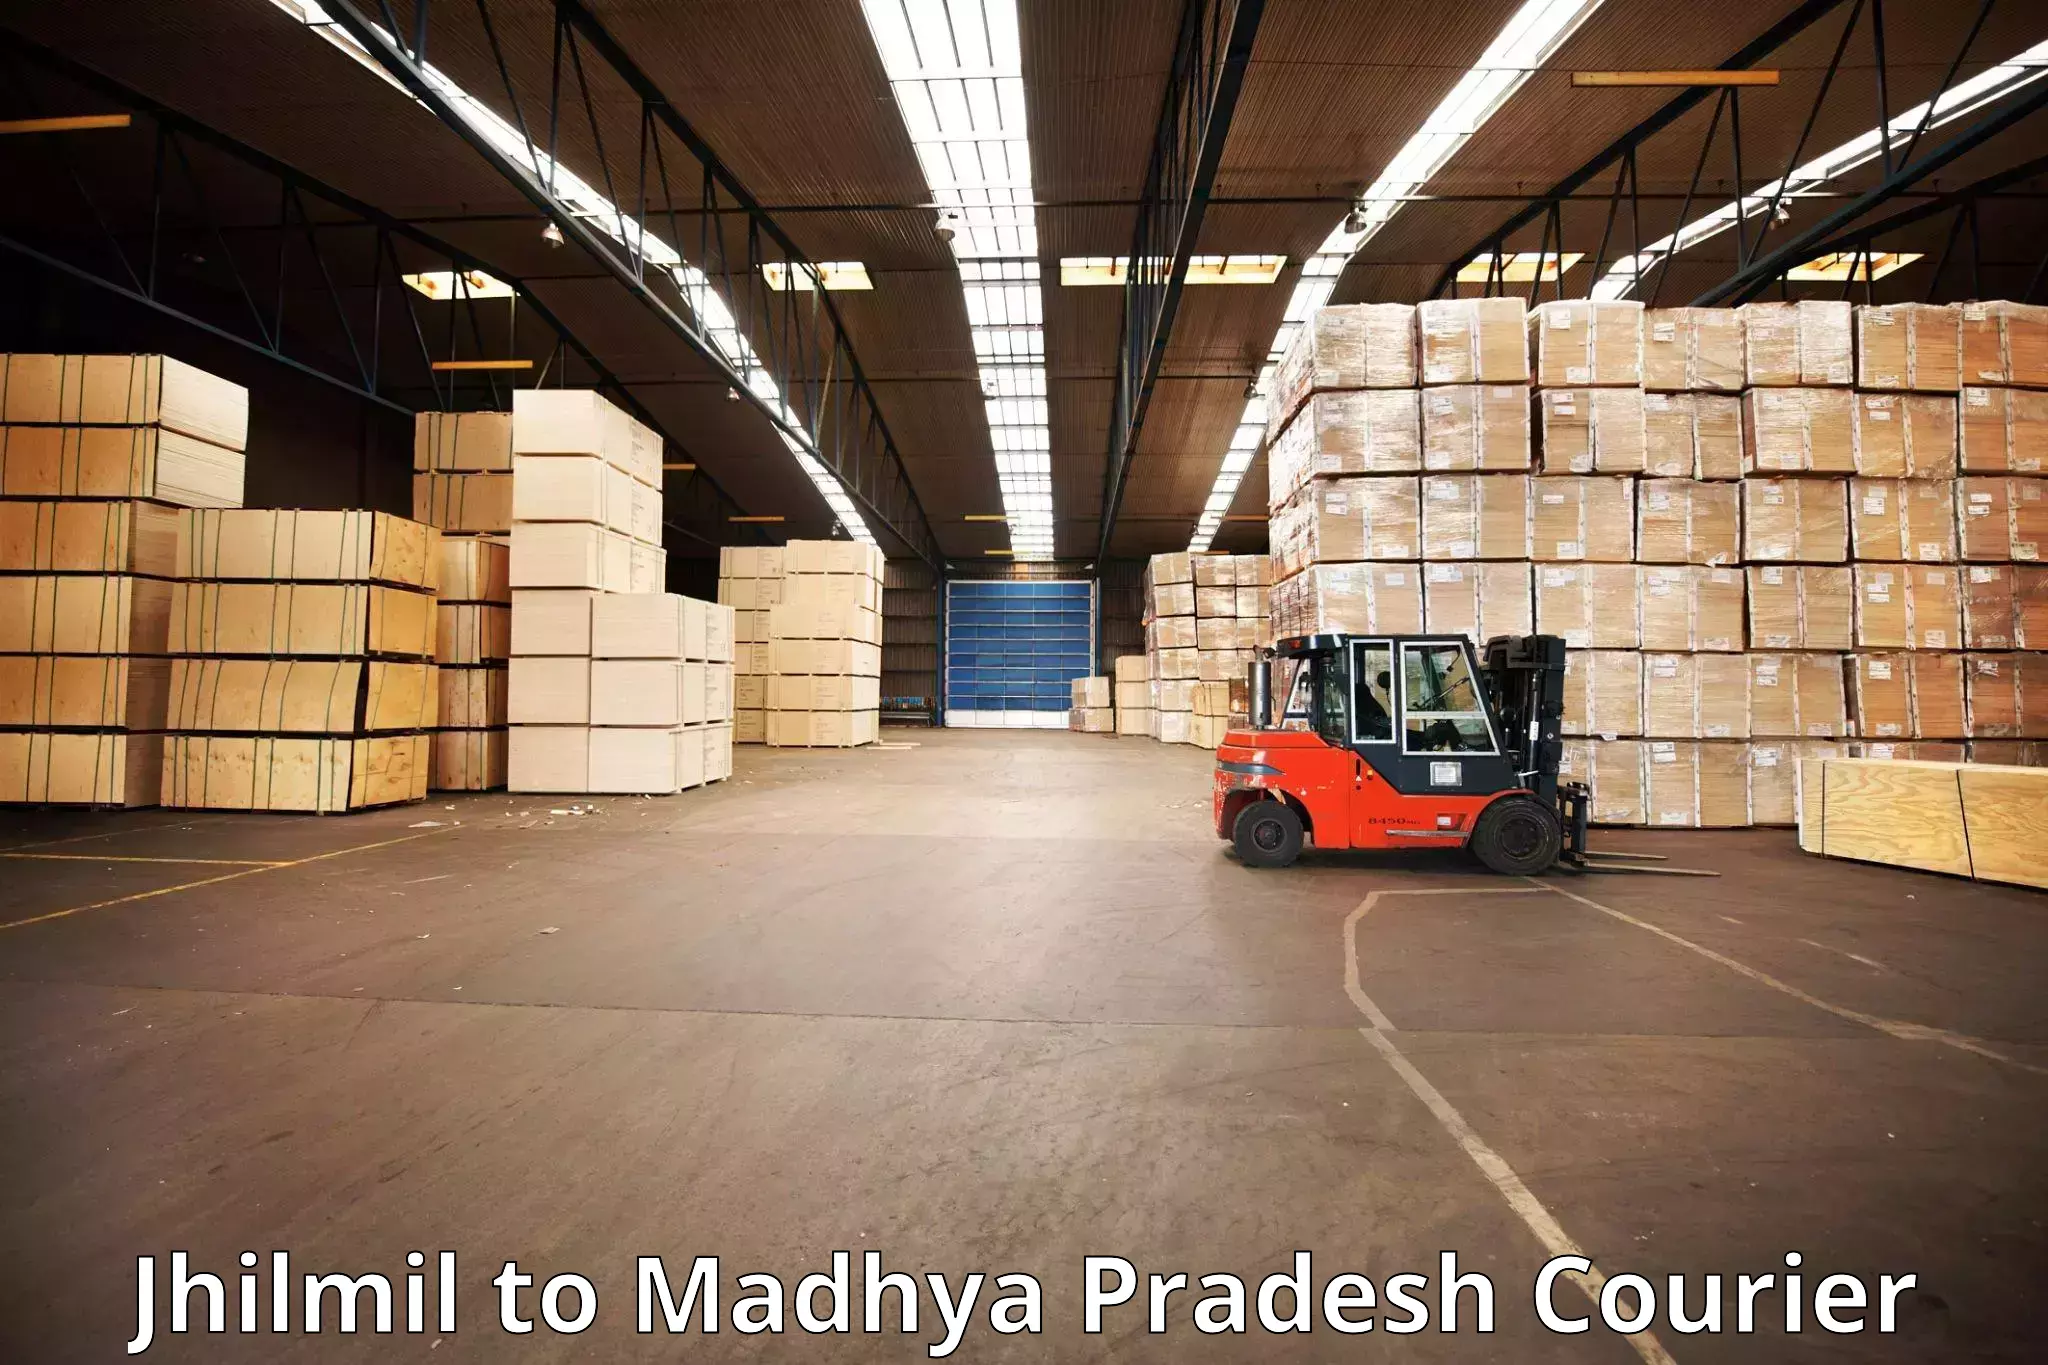 Express baggage shipping Jhilmil to Bhopal